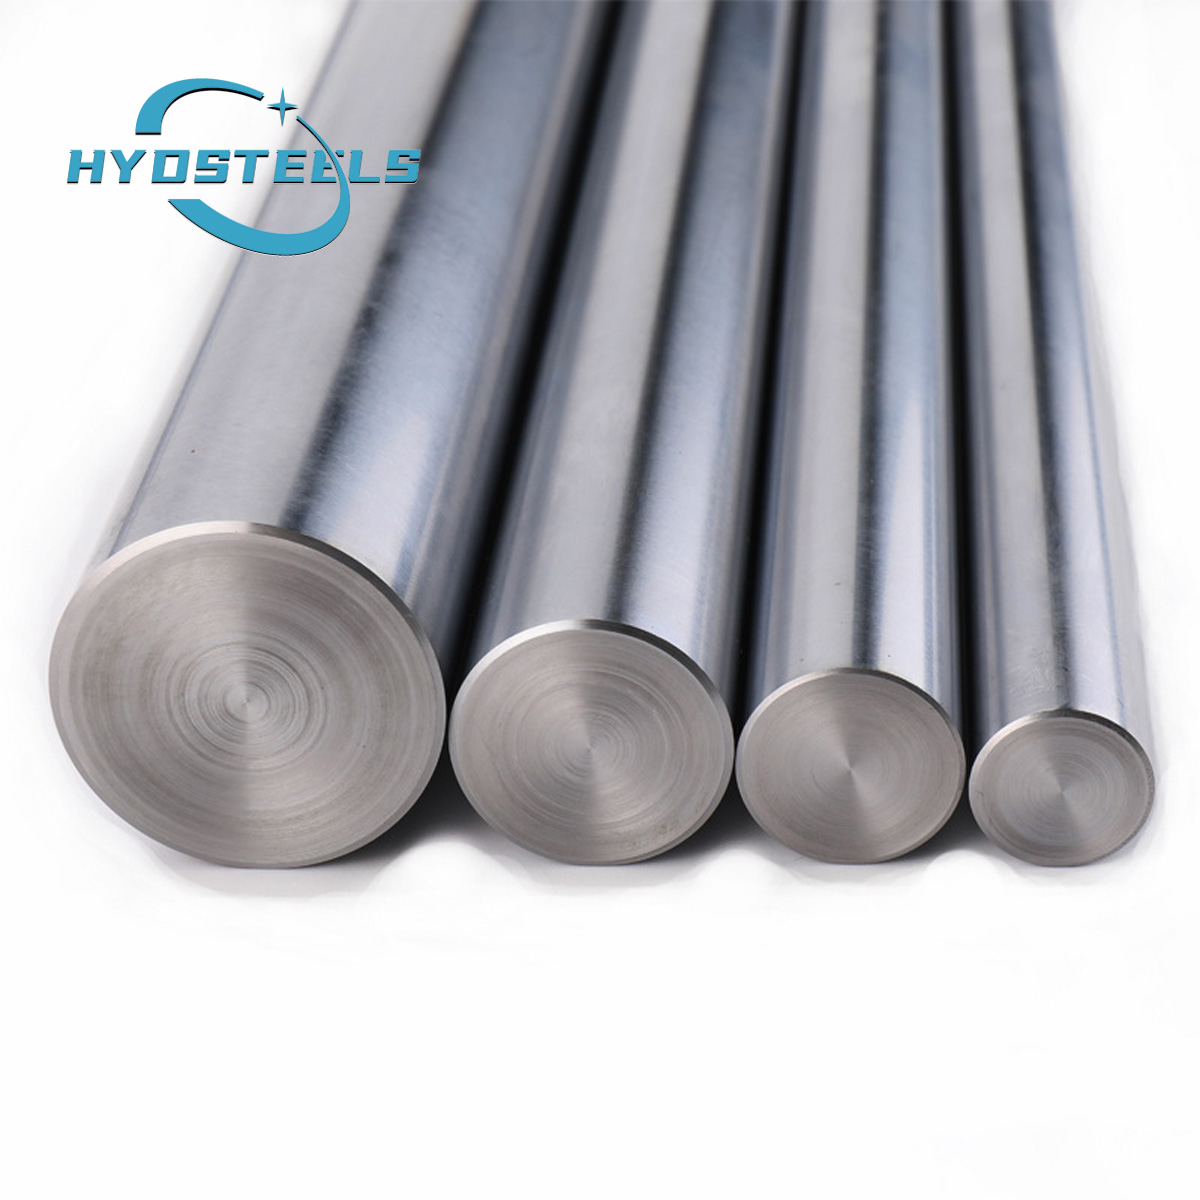  High Quatity Hydraulic Cylinder Chrome Plated Rod for Piston Rod Manufacturer Suppliers 